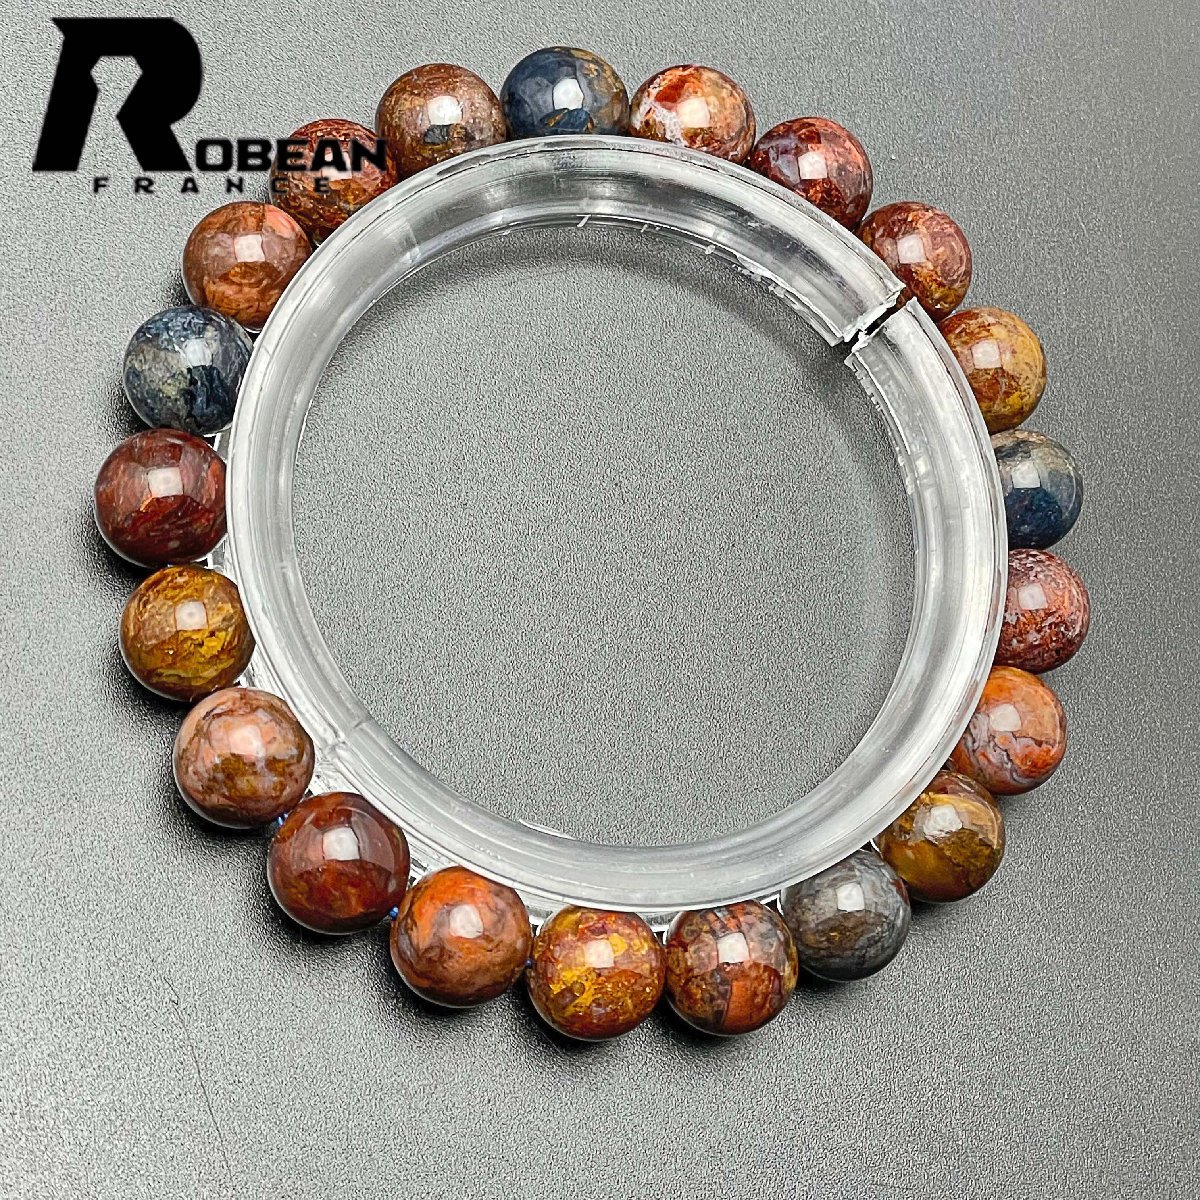  on goods EU made regular price 5 ten thousand jpy *ROBEAN* Peter site * accessory bracele Power Stone natural stone amulet approximately 9.5-10.0mm 1001G424